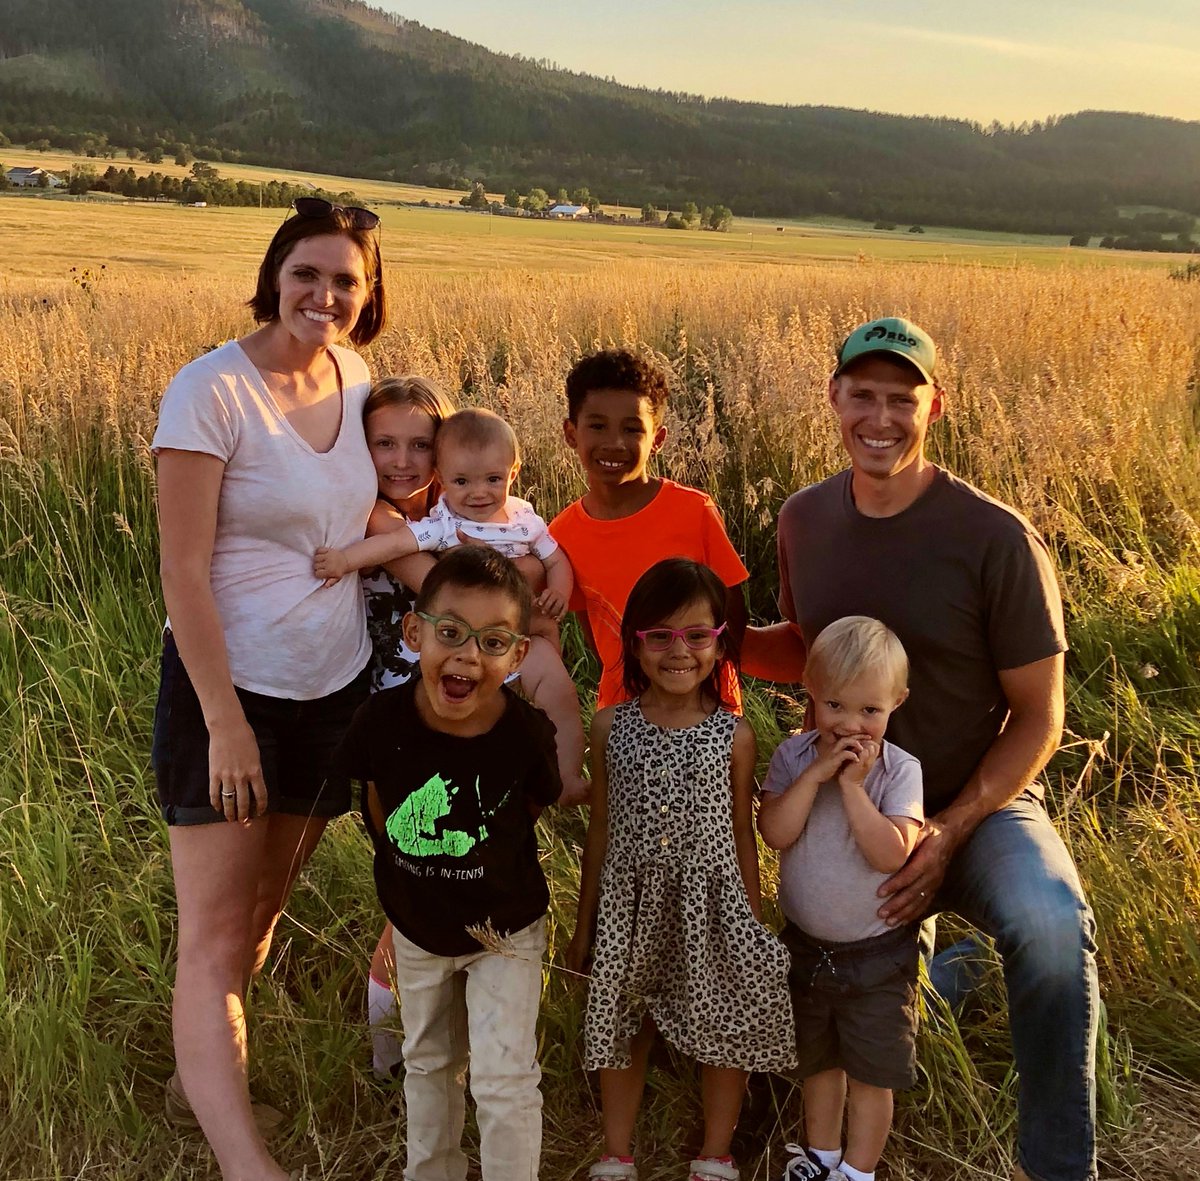 John and Sarah Enos of Deadwood fostered and adopted three young children in 2020. This family of eight shows how fostering & adopting is a blessing to children and families. Congrats to the Enos family for being named @CCAInstitute South Dakota 2022 Angels in Adoption honorees.